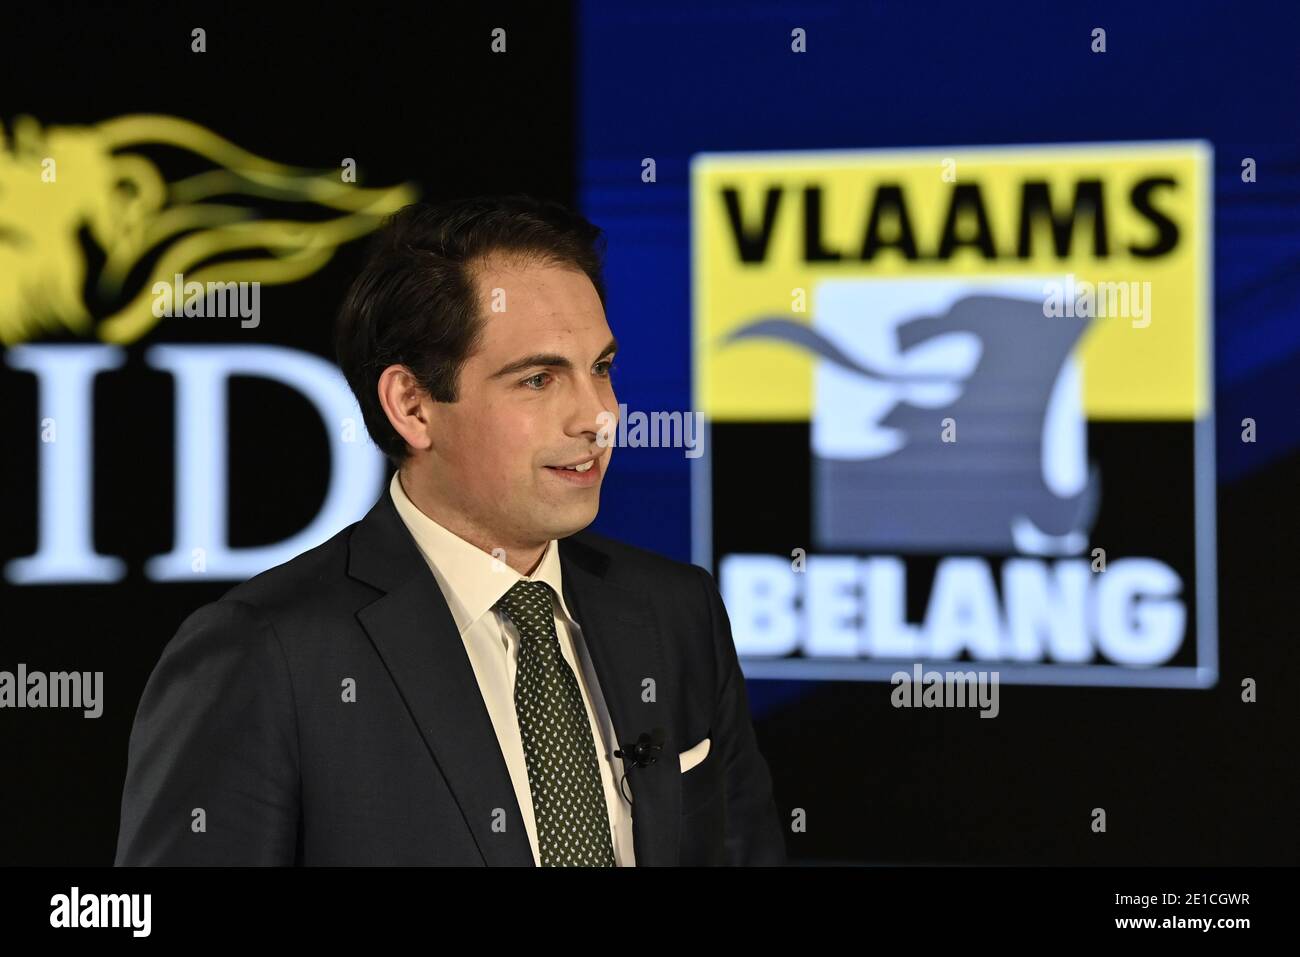 Vlaams Belang chairman Tom Van Grieken pictured ahead of the registration  and online broadcast of the new year's reception of Flemish far right party  Stock Photo - Alamy